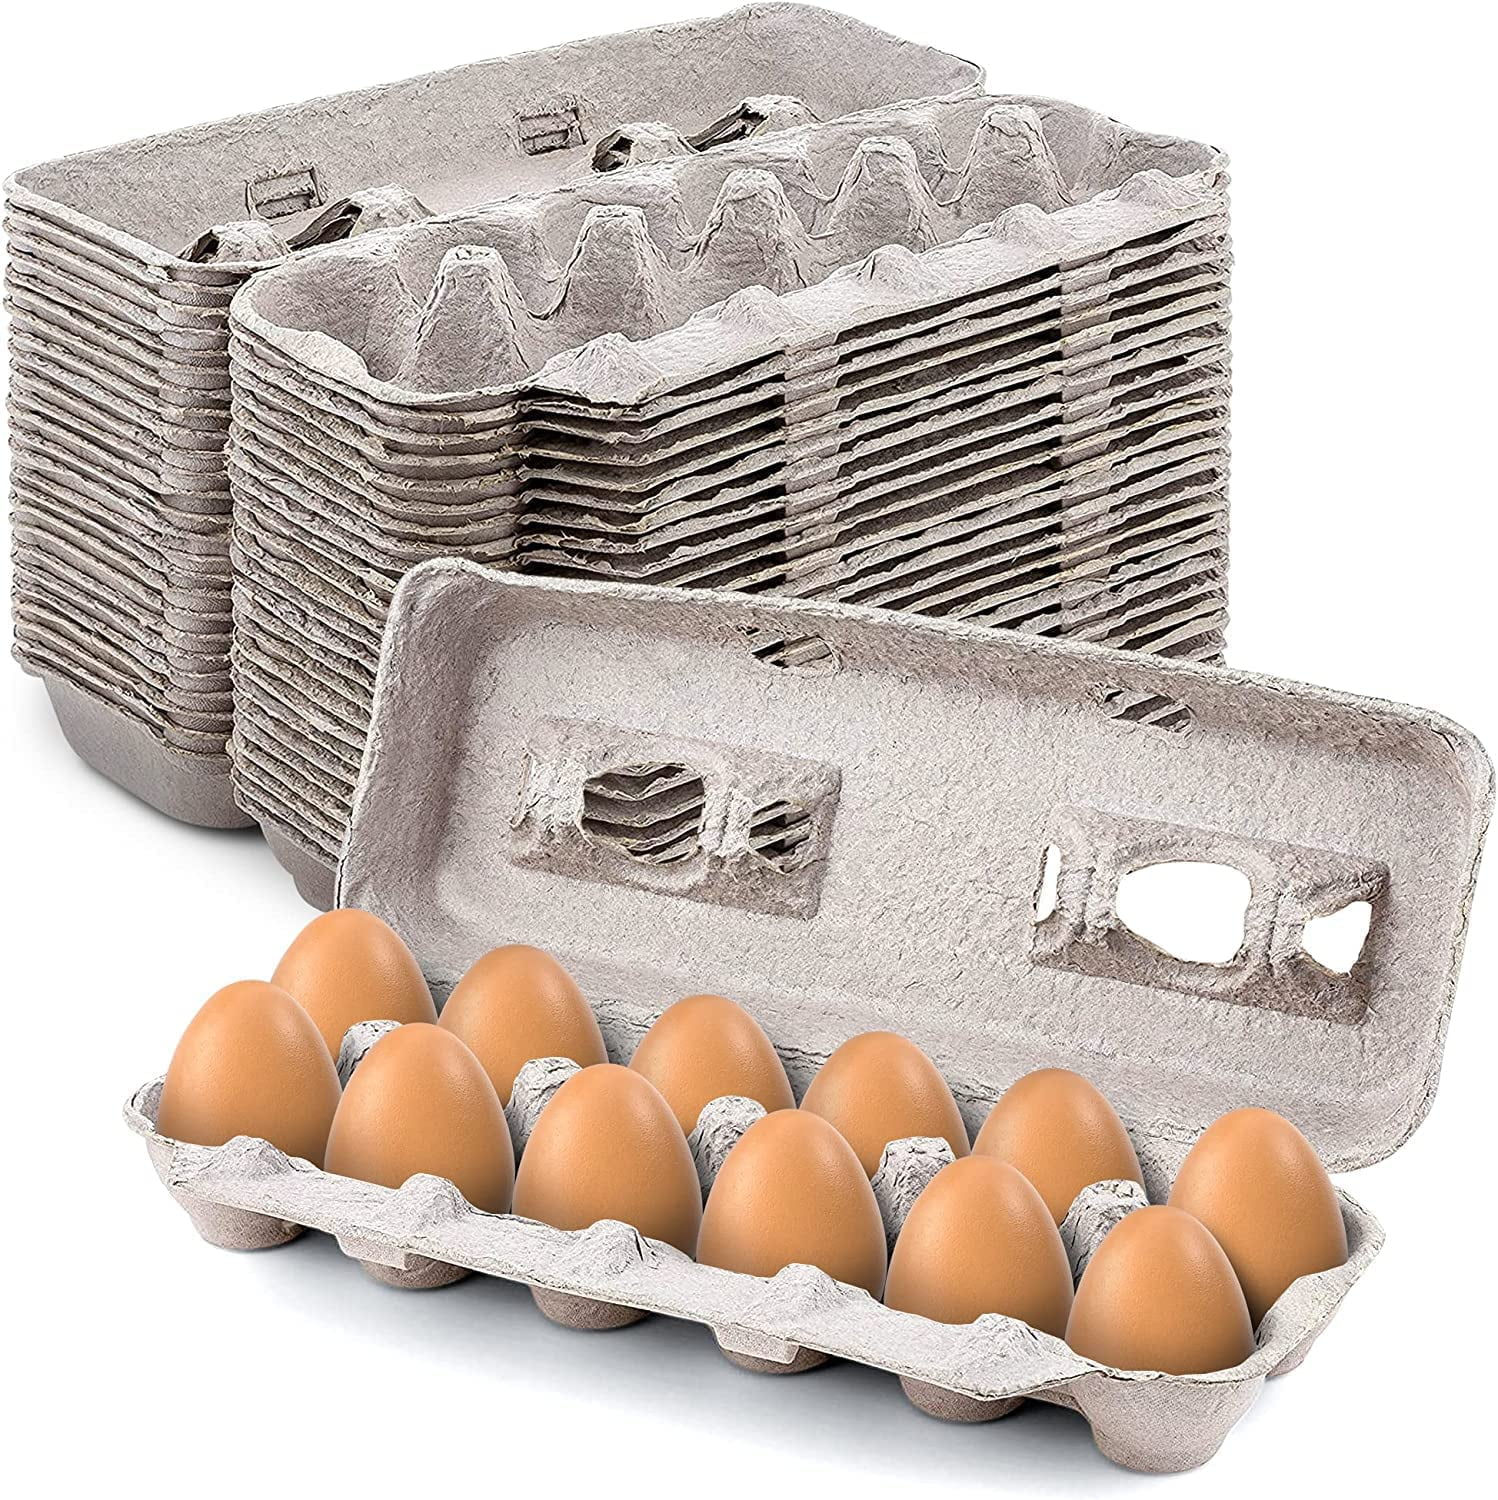 Basicwise Clear Plastic Egg Carton 12 Egg Holder Carrying Case with Handle Set of 2